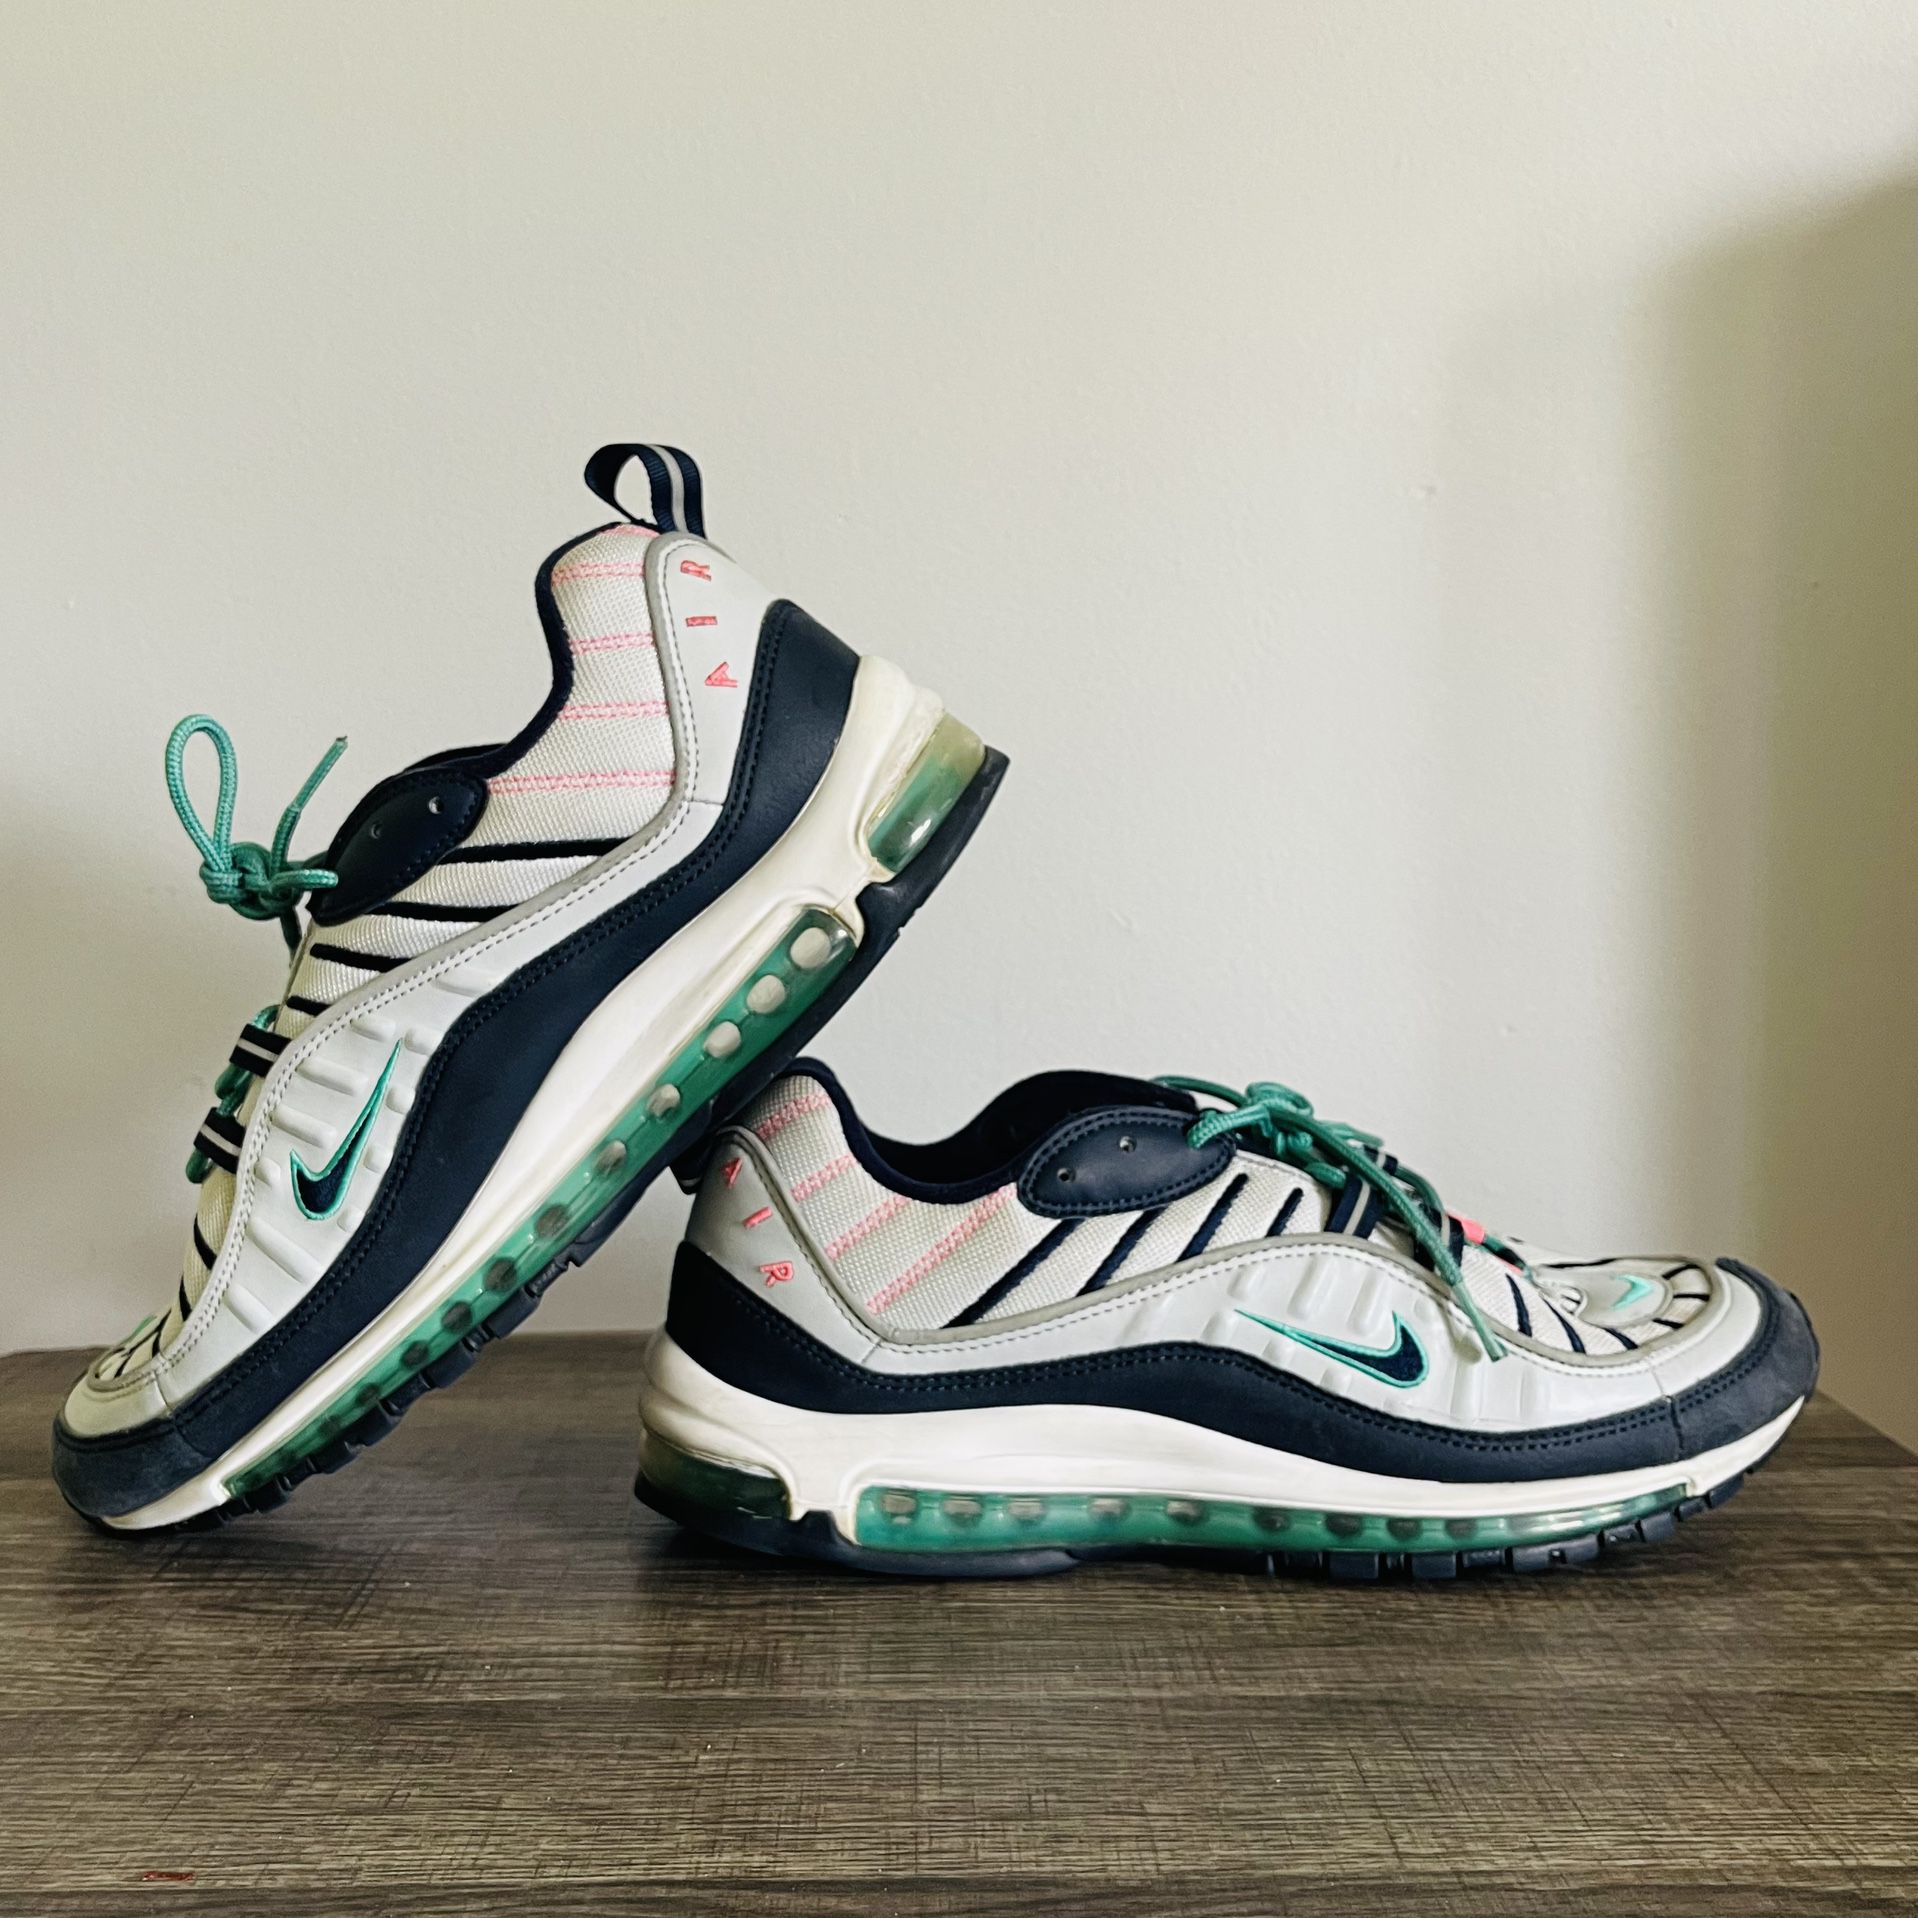 Nike Air Max 98 South Beach Sneakers,  Nike Shoes, Size 11.5